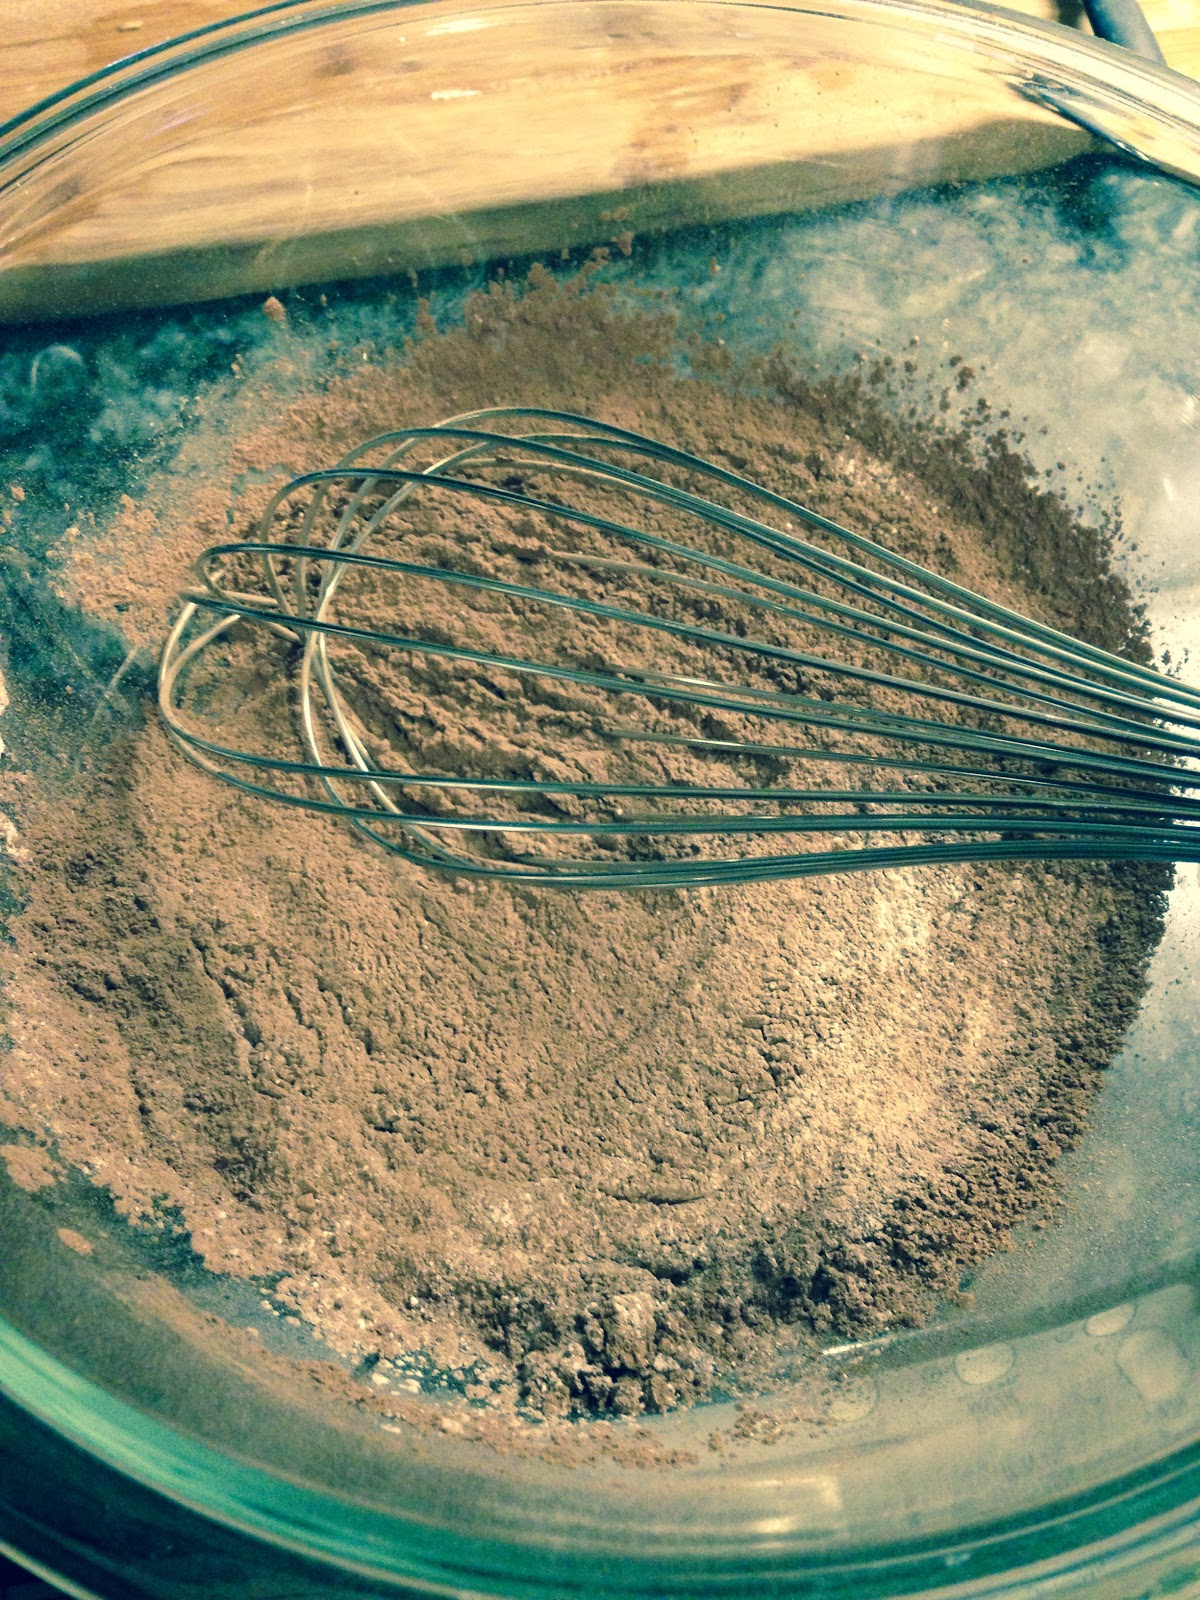 wisking dry ingredients in a bowl